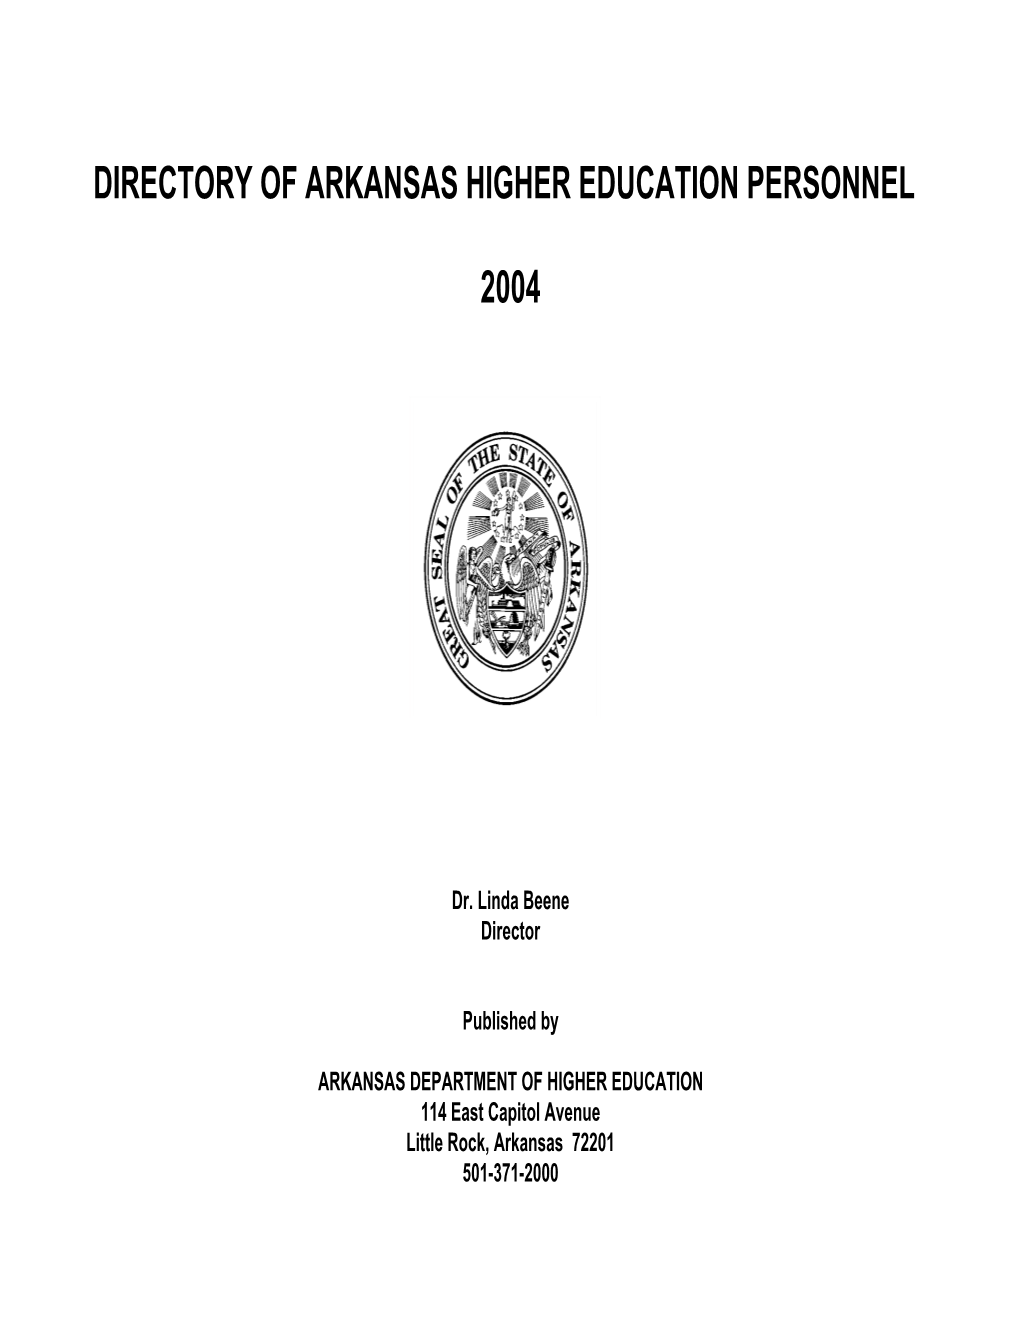 Directory of Arkansas Higher Education Personnel 2004